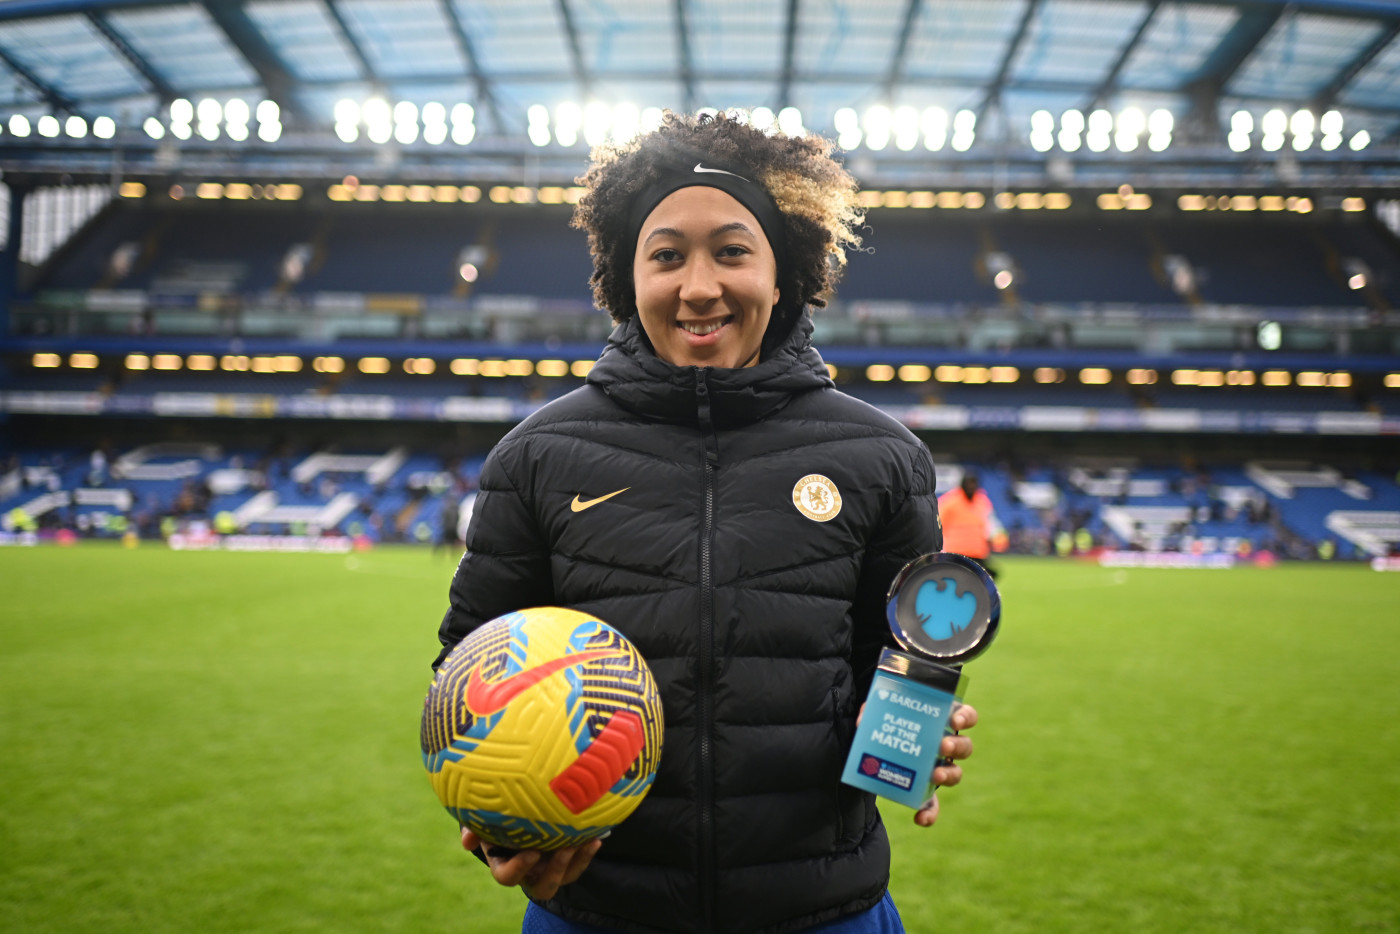 Lauren James with the match ball and Player of the Match award after our last league match against Manchester United